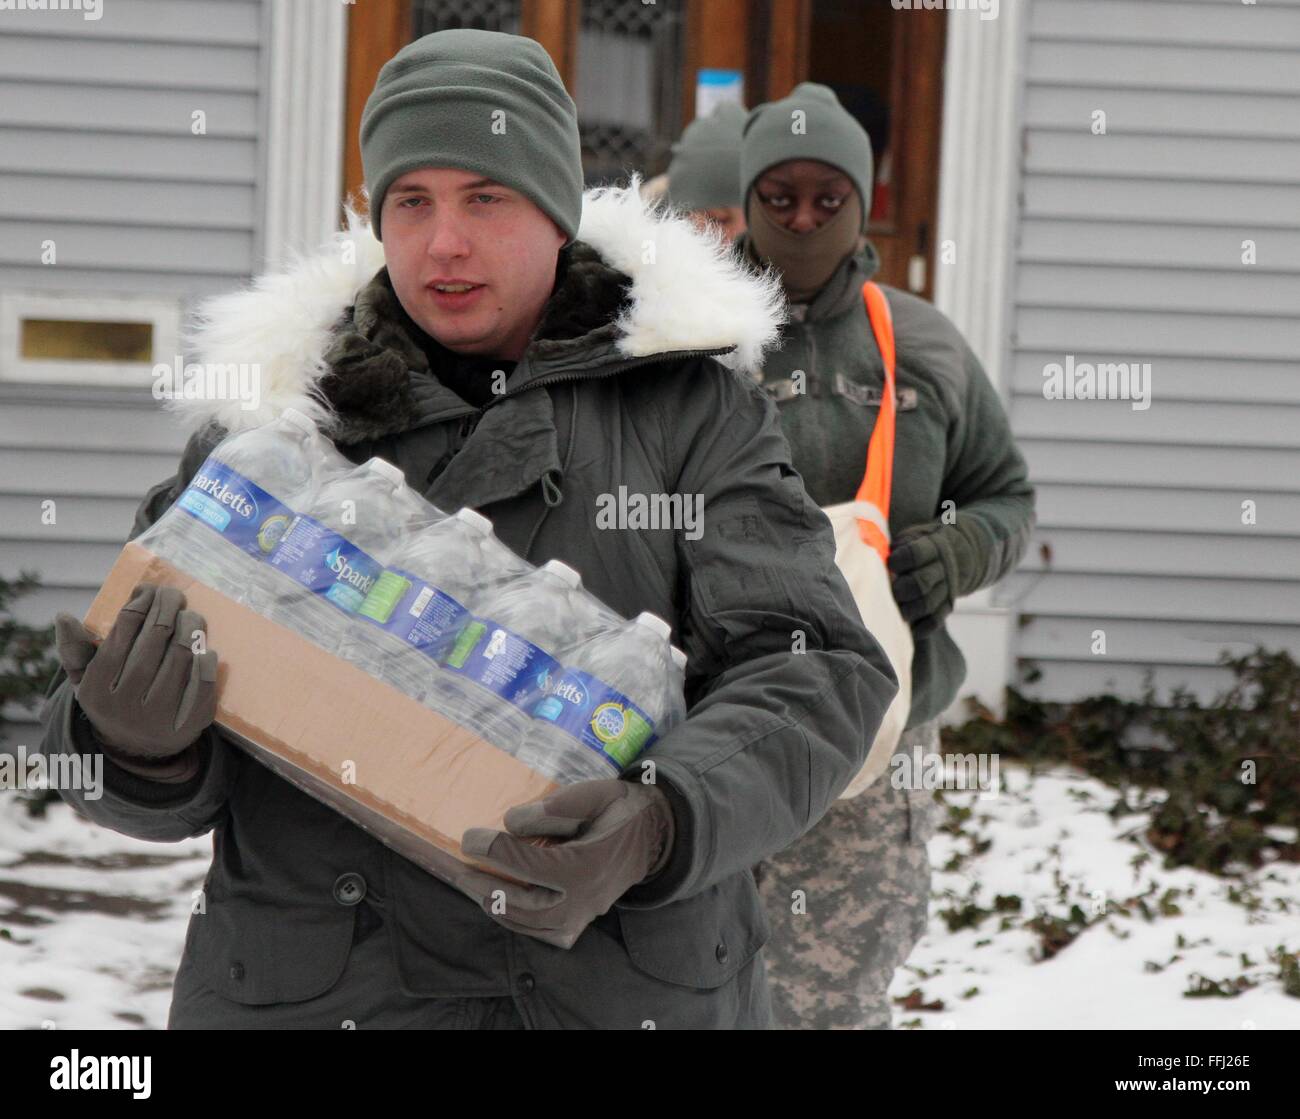 U.S Air Force airmen with the Michigan National Air Guard distribute bottled water to residents effected by lead contamination in the city drinking water January 23, 2016 in Flint, Michigan. As many as 12,000 children have been exposed to dangerous drinking water after the state government switched water supplies without complying with federal regulations on safety. Stock Photo